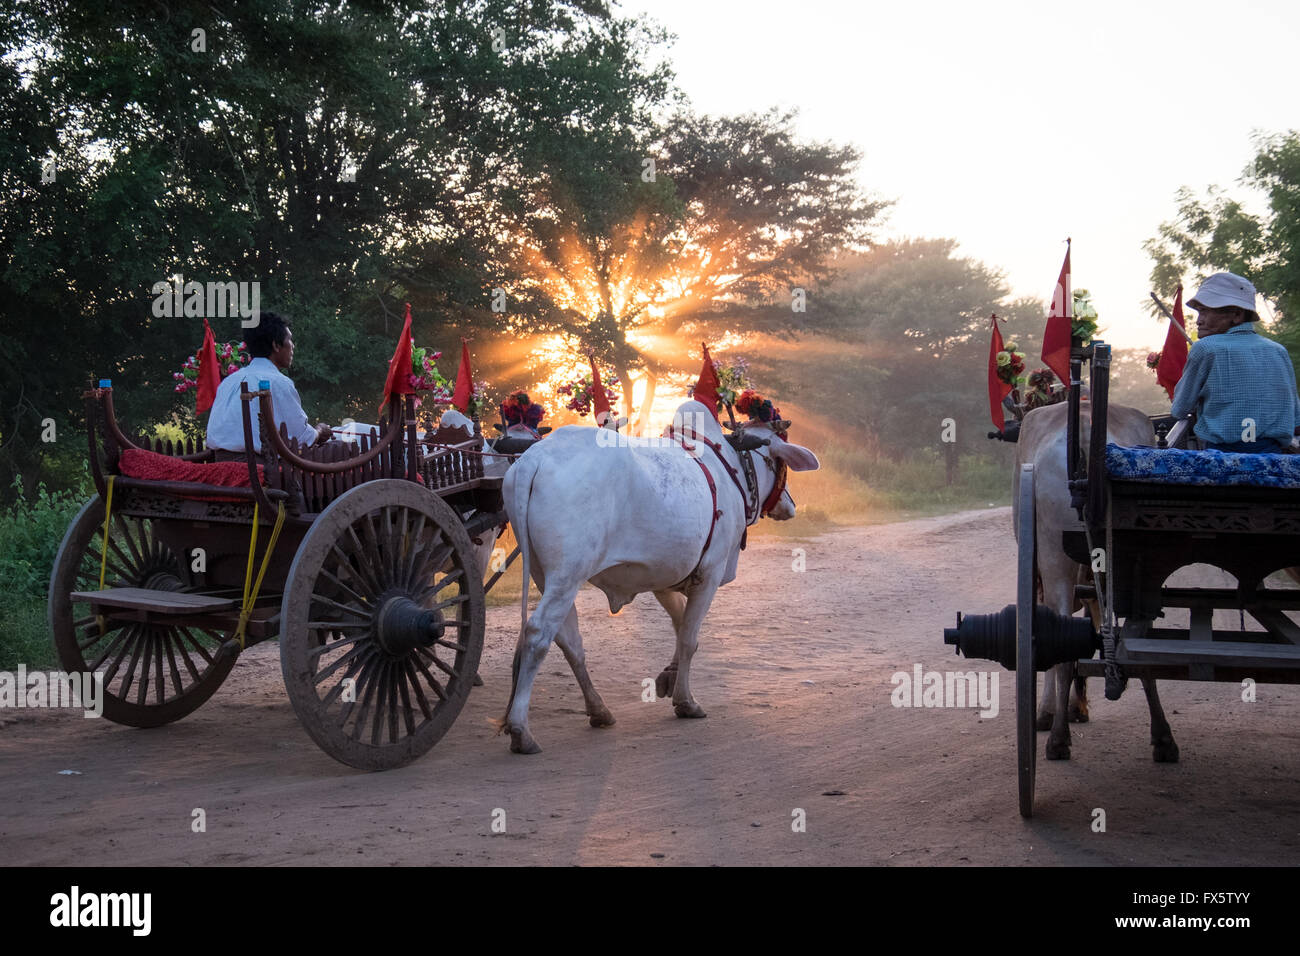 Men on Ox and cart making their way along dusty dirt tracks at sunset in Bagan, Myanmar Stock Photo